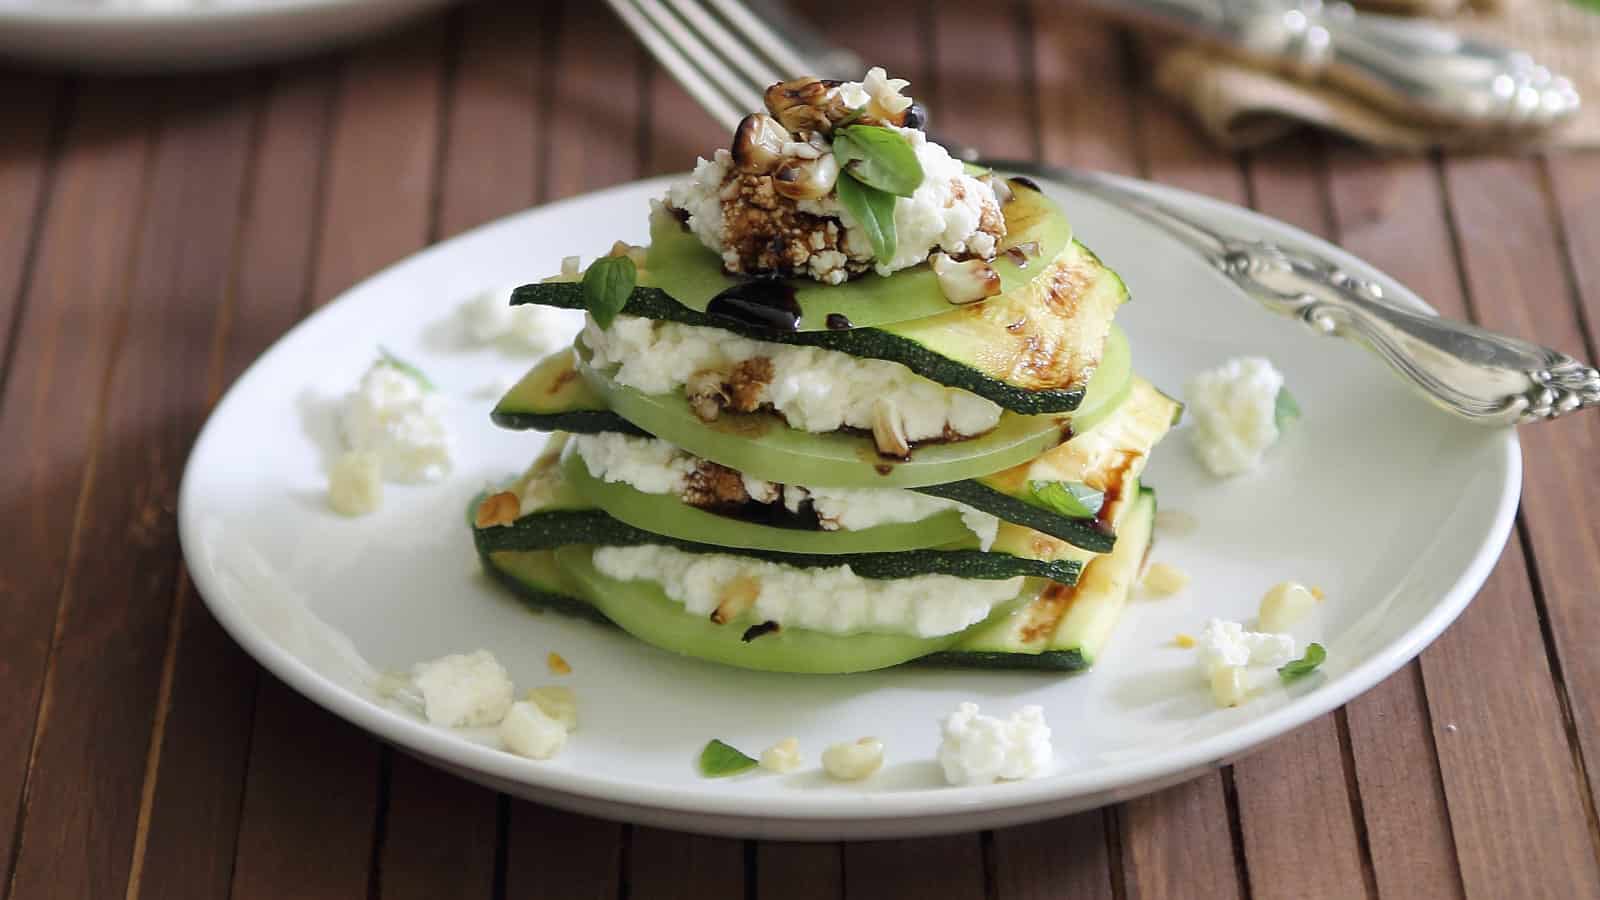 Grilled zucchini stacks with ricotta and green tomatoes on a plate.